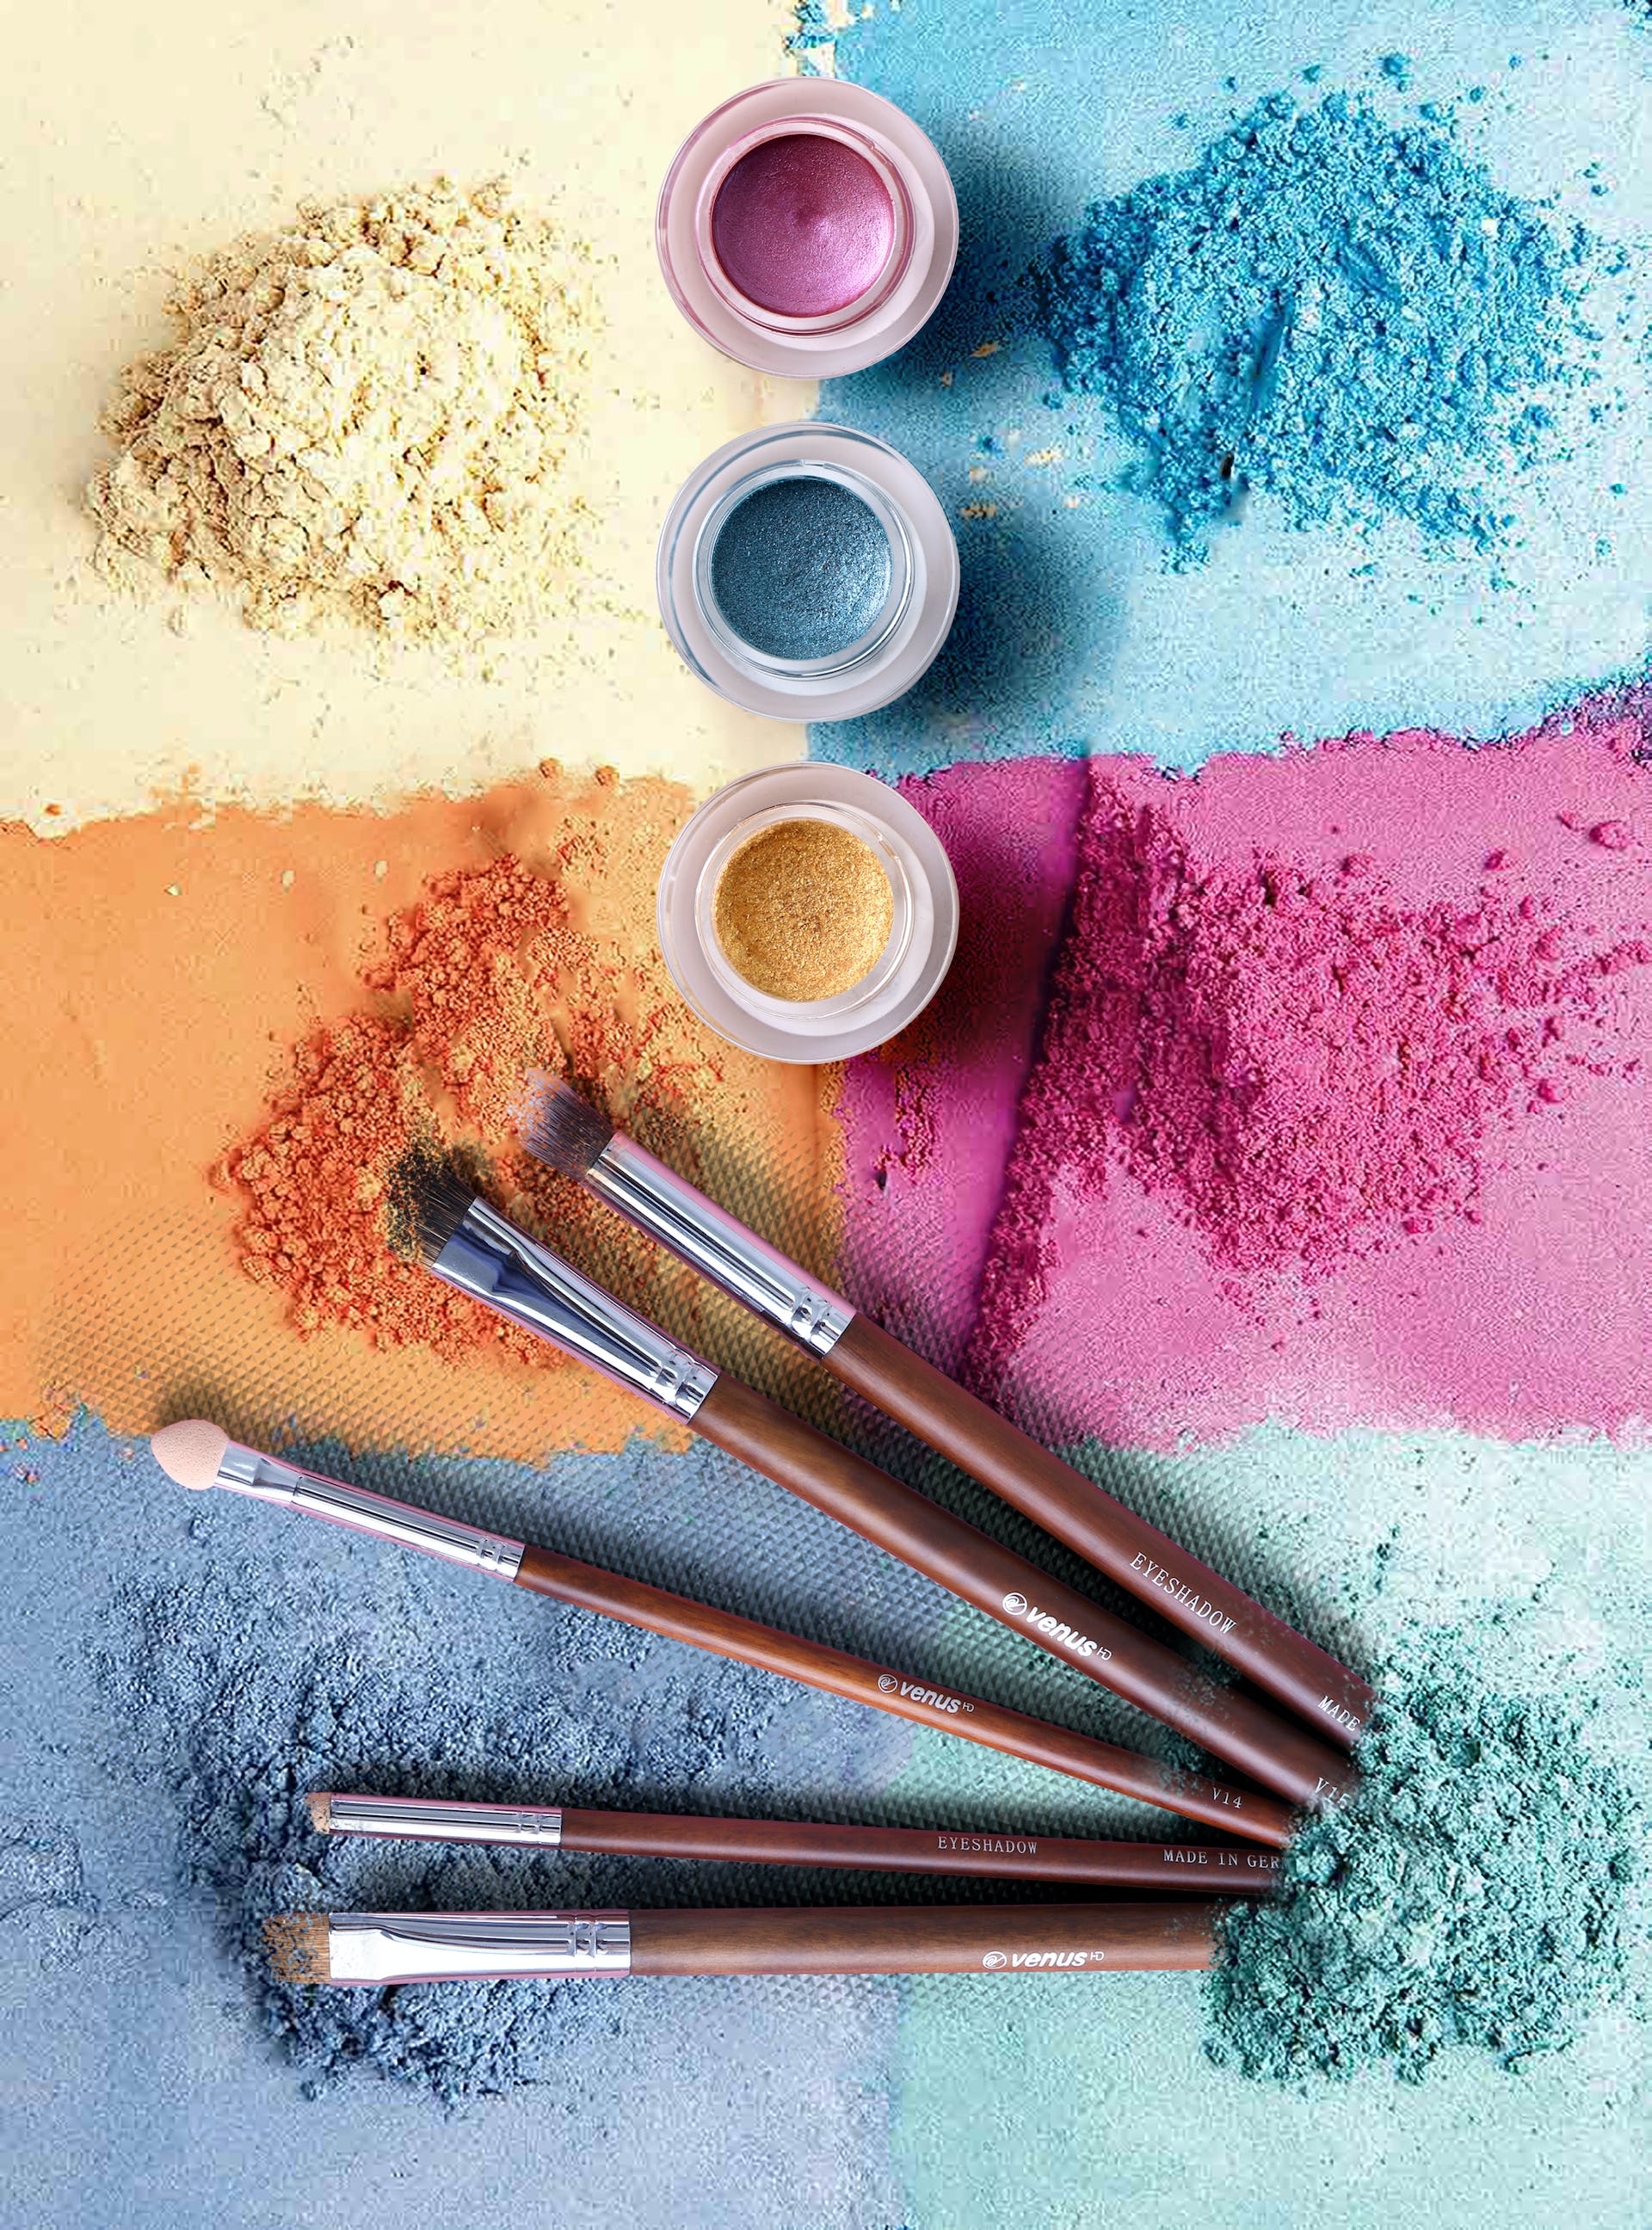 Colored Powders and Brush - Photo by Venus HD Make-up & Perfume: https://www.pexels.com/photo/colored-powders-and-brush-1749452/